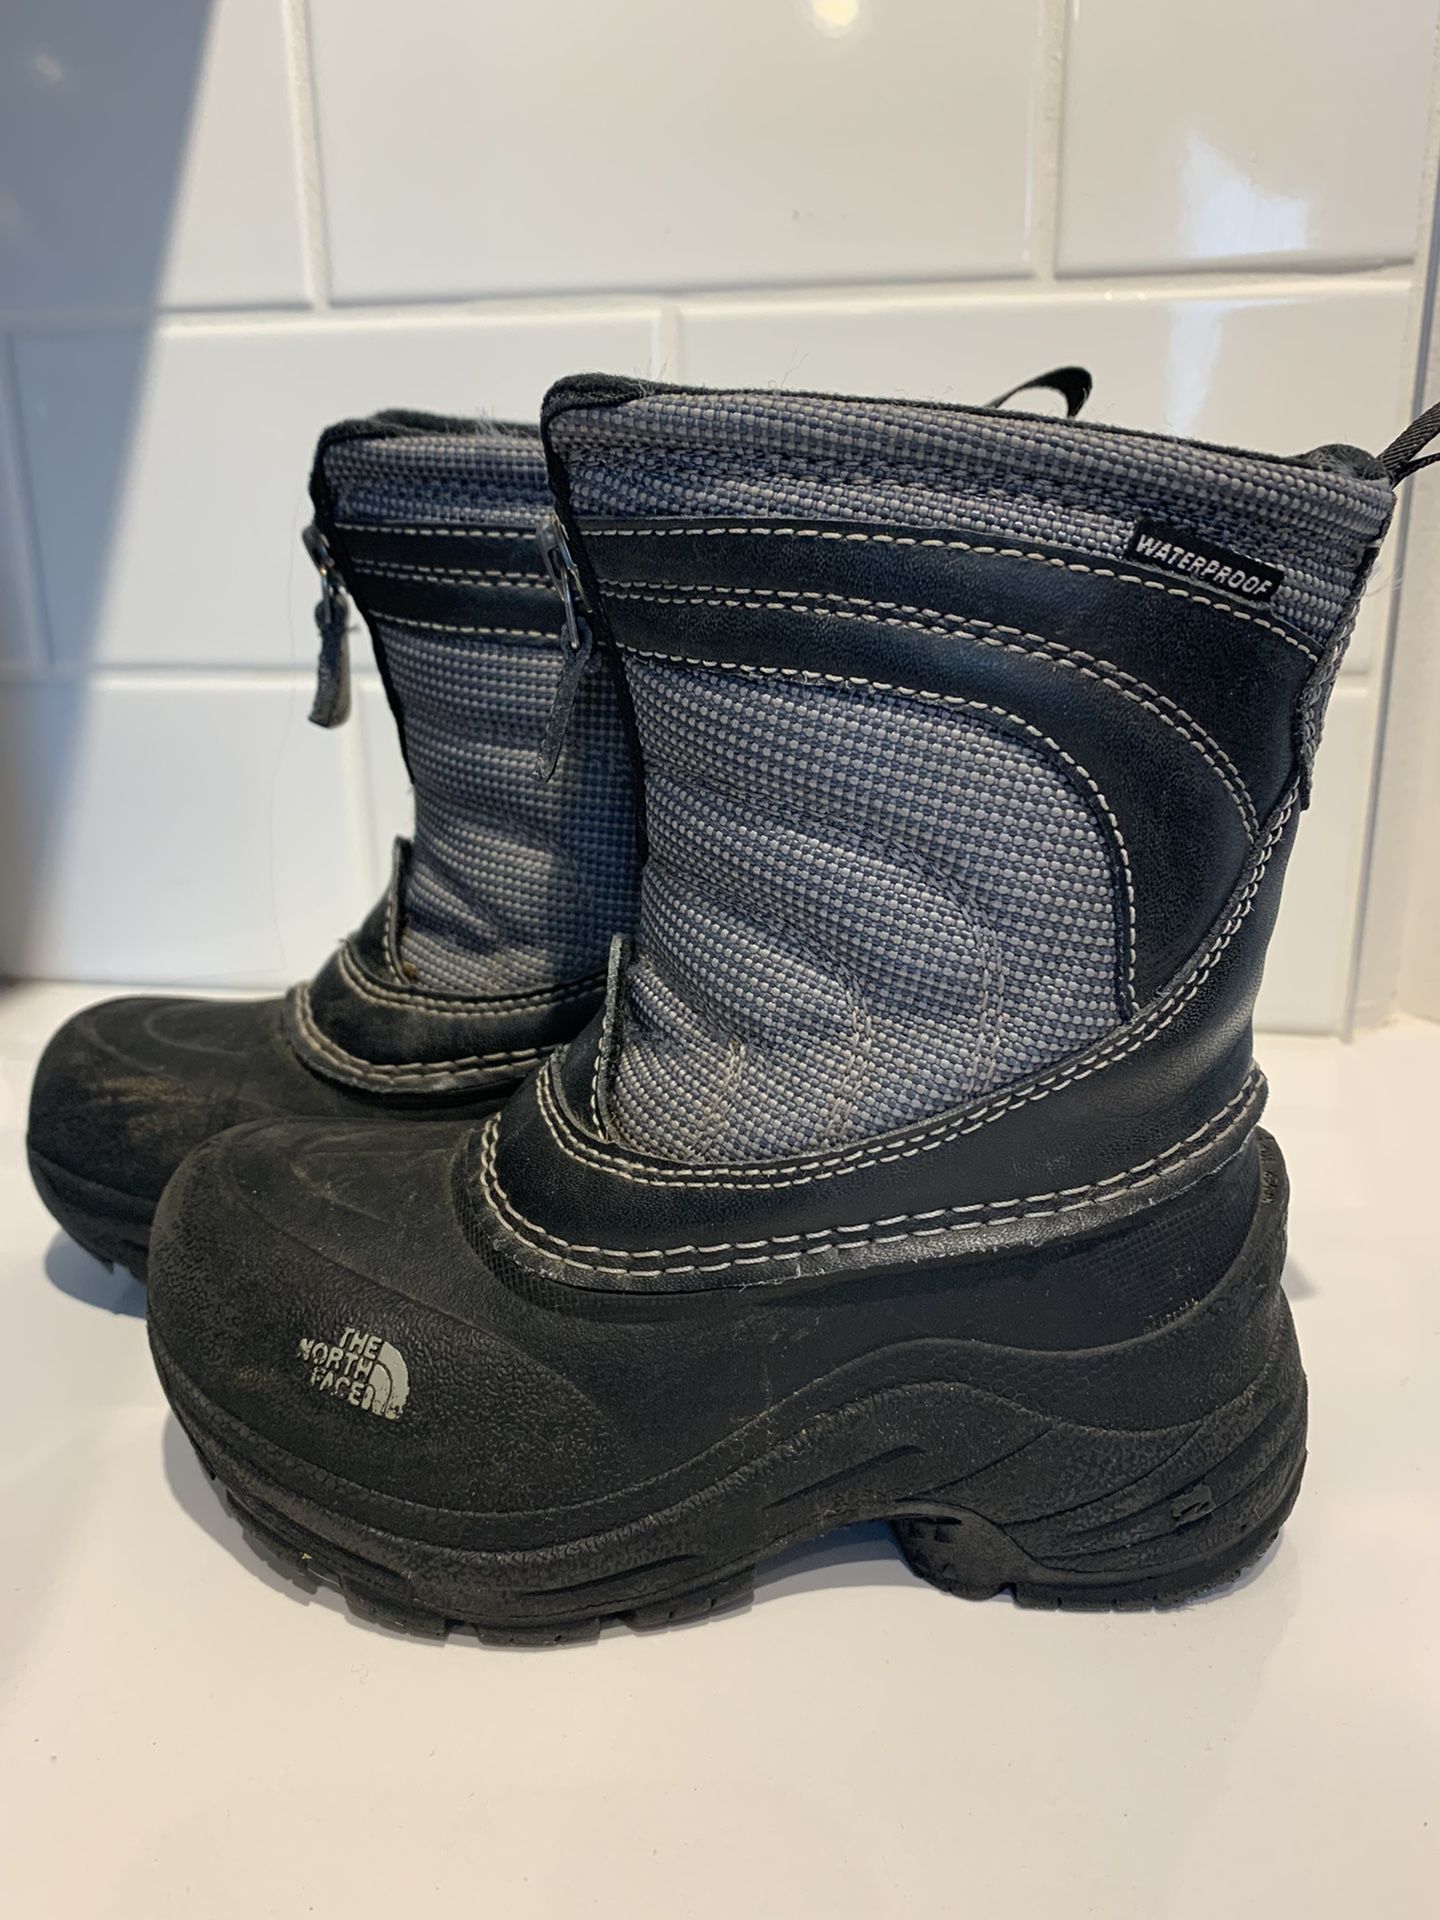 North face Snow Boots Toddler Sz10